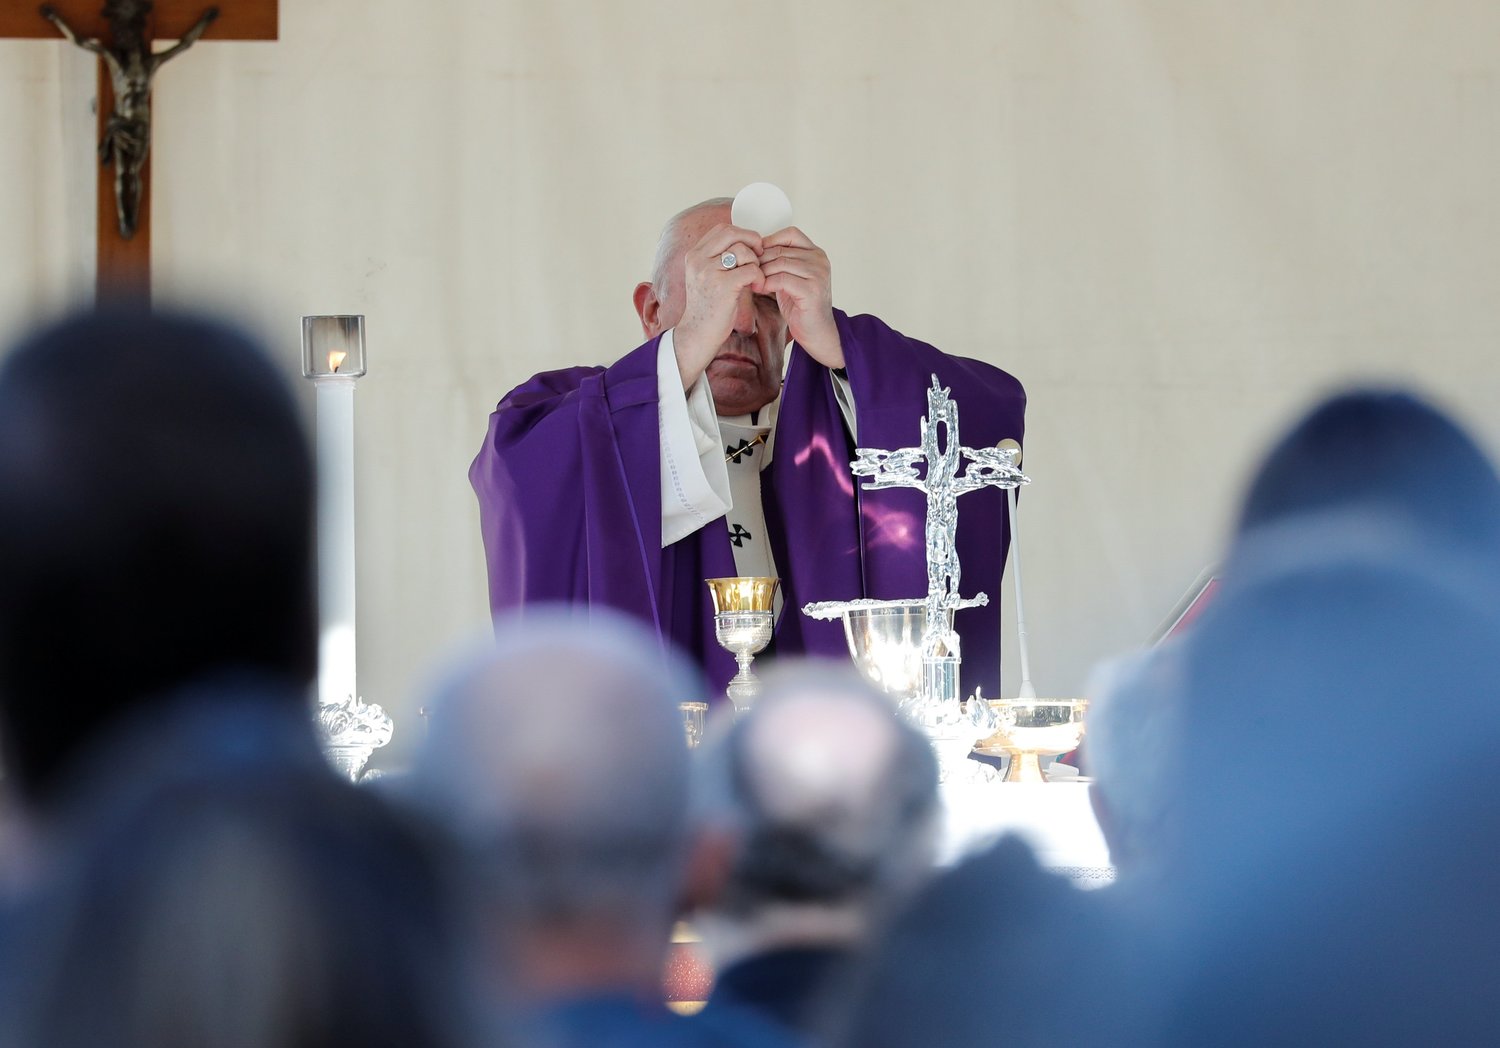 Pope Francis elevates the Eucharist as he celebrates All Souls' Day Mass at the French Military Cemetery in Rome Nov. 2, 2021.